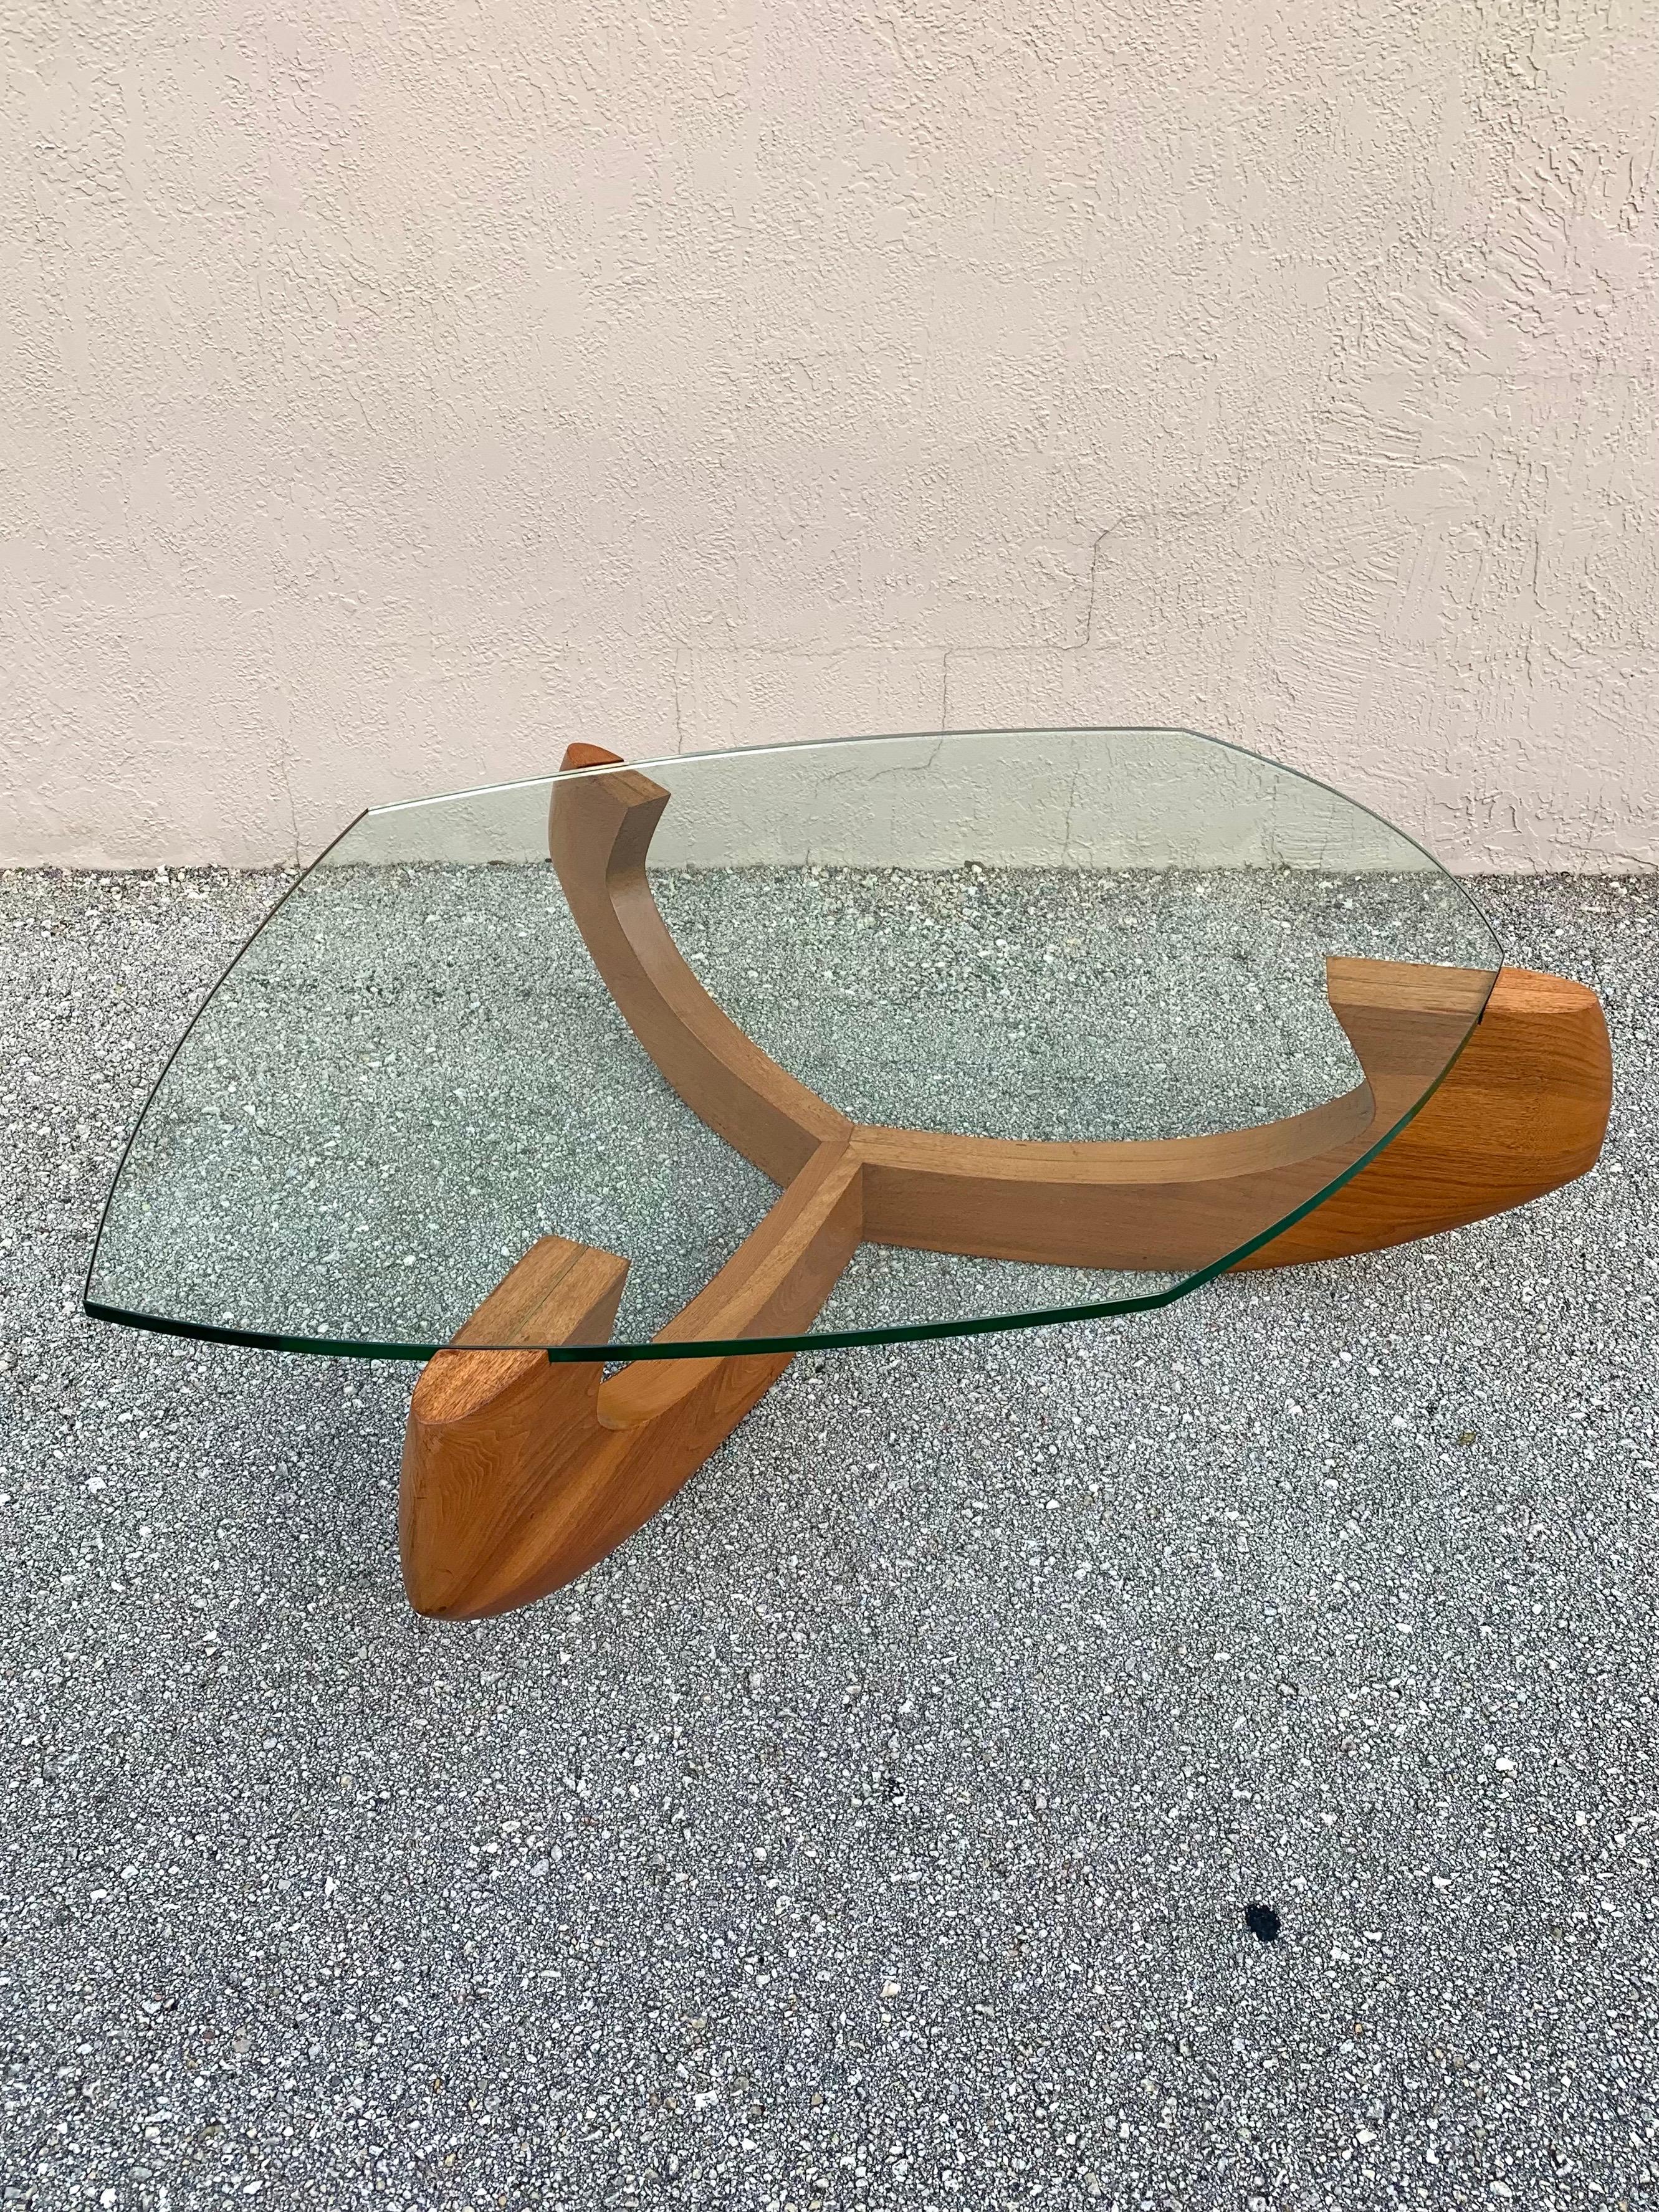 table with glass in middle